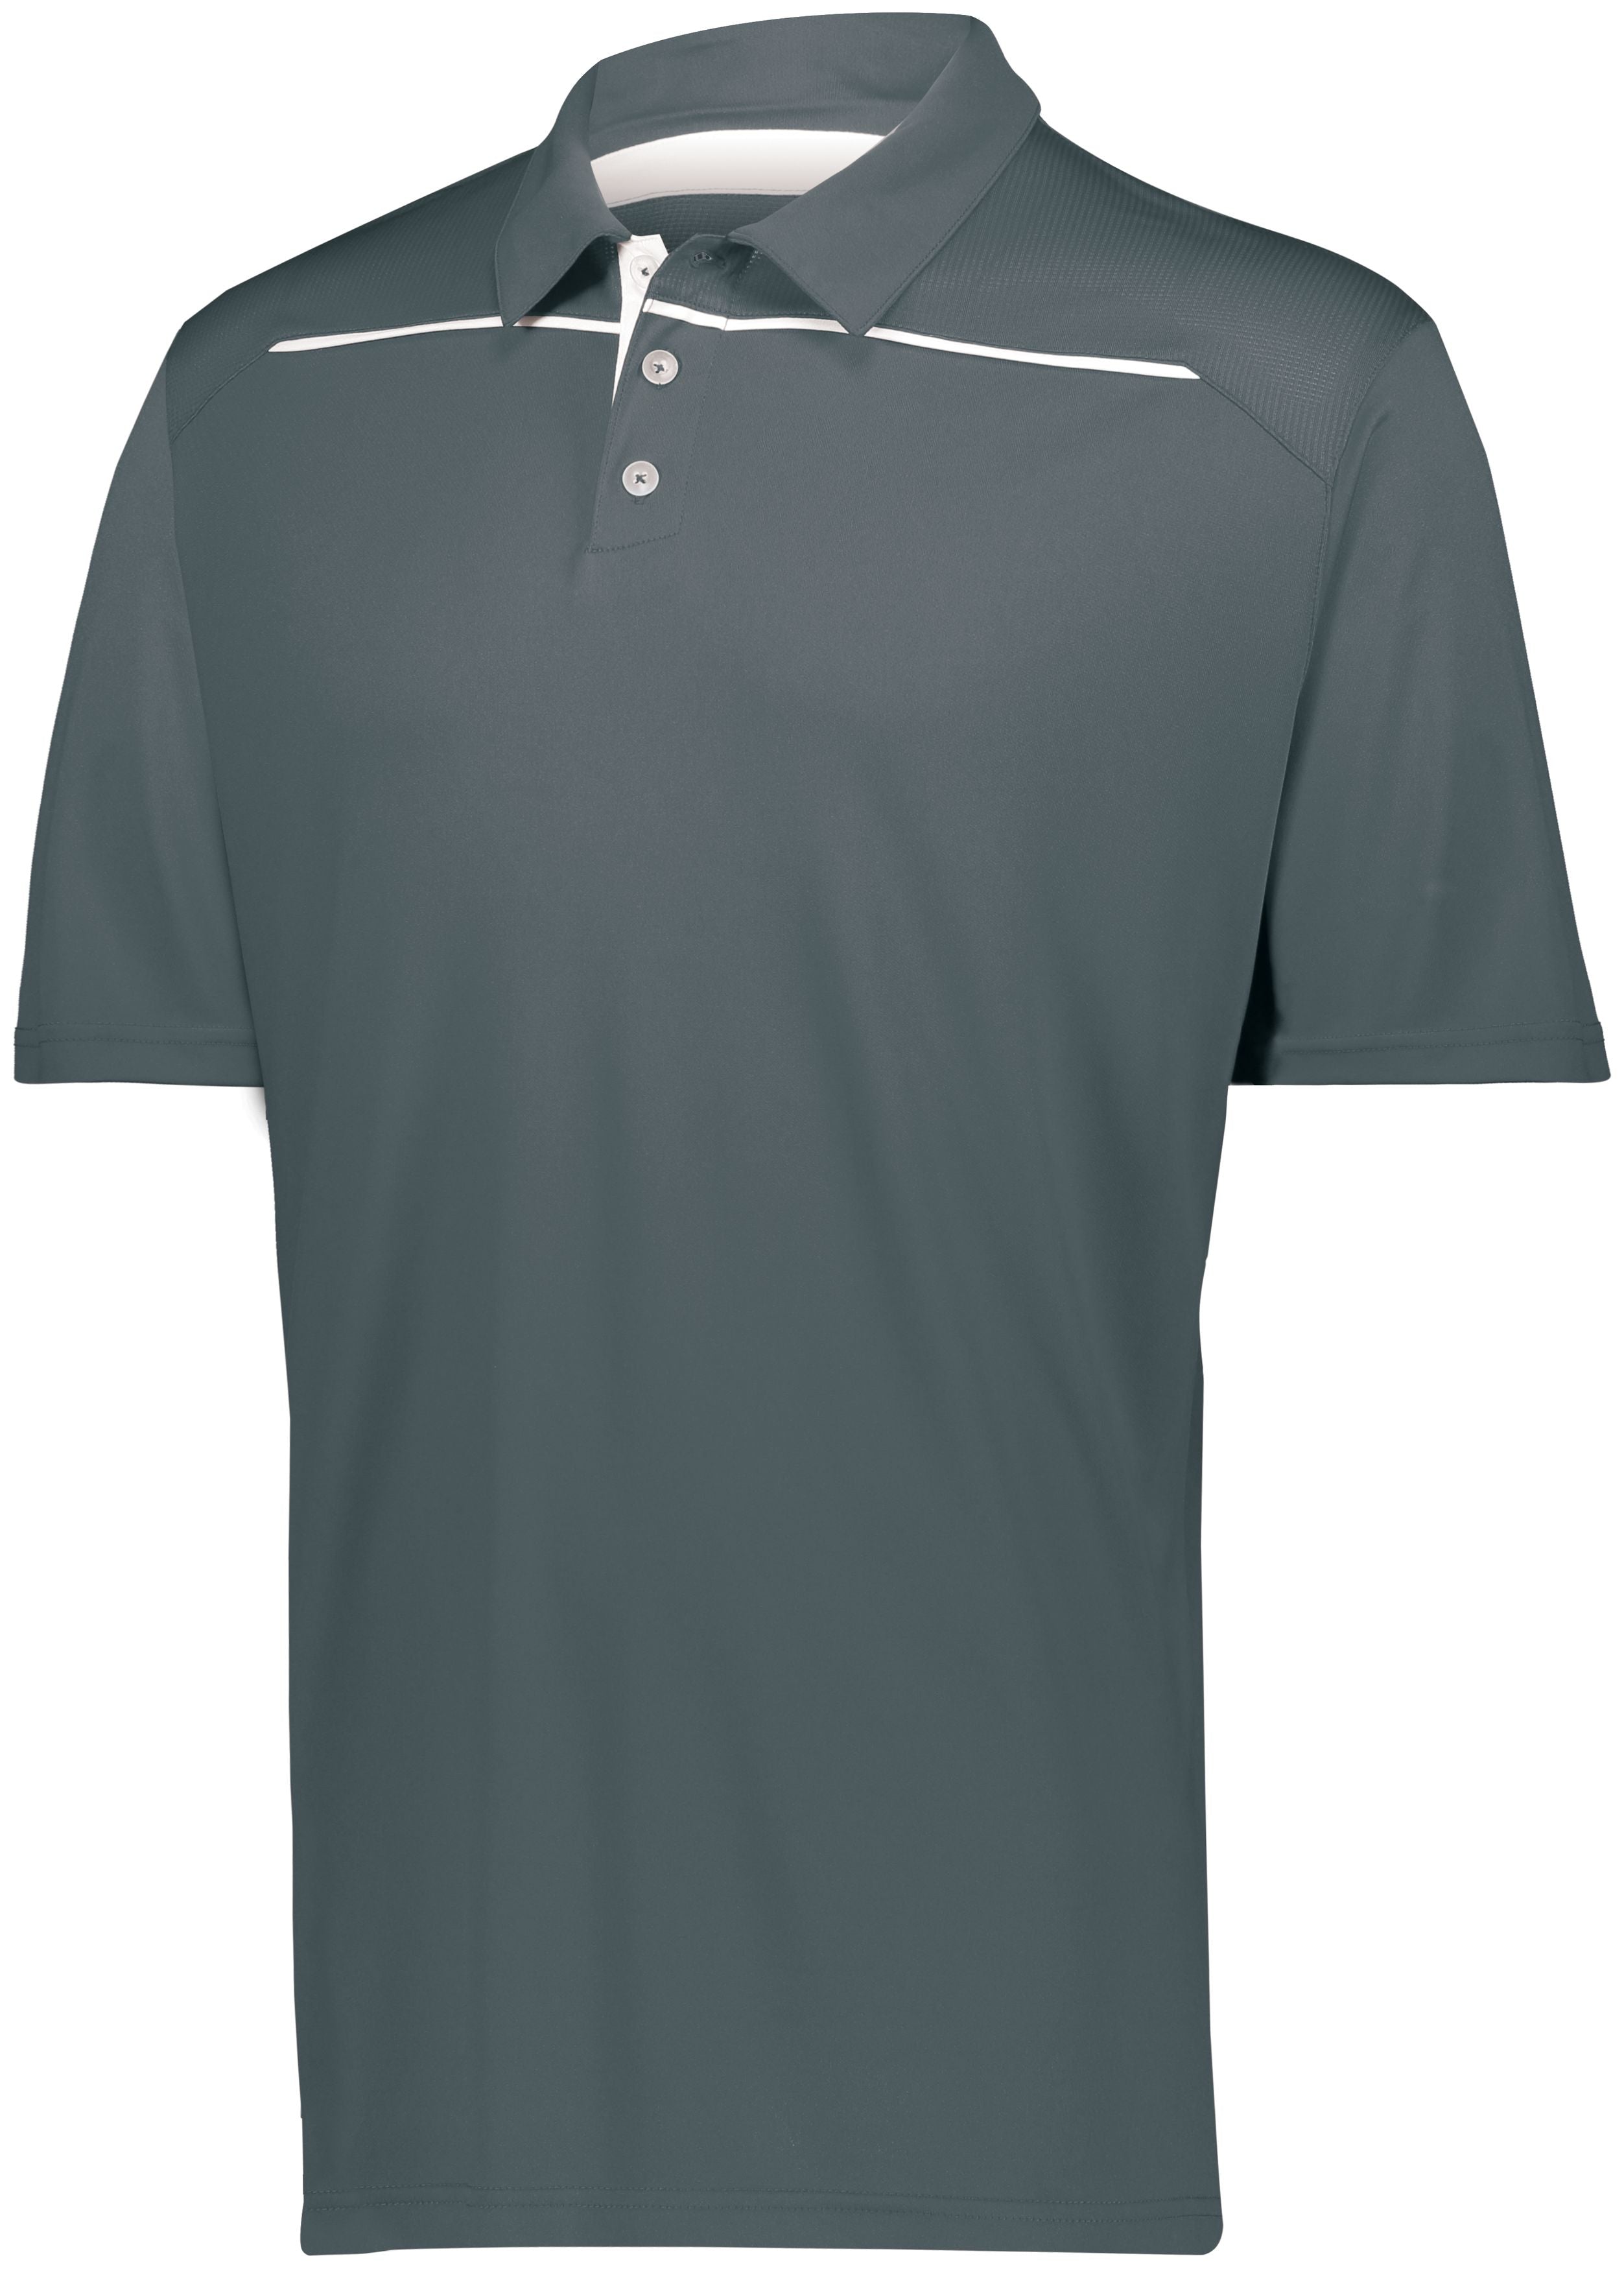 Holloway Defer Polo in Graphite/White  -Part of the Adult, Adult-Polos, Polos, Holloway, Shirts product lines at KanaleyCreations.com